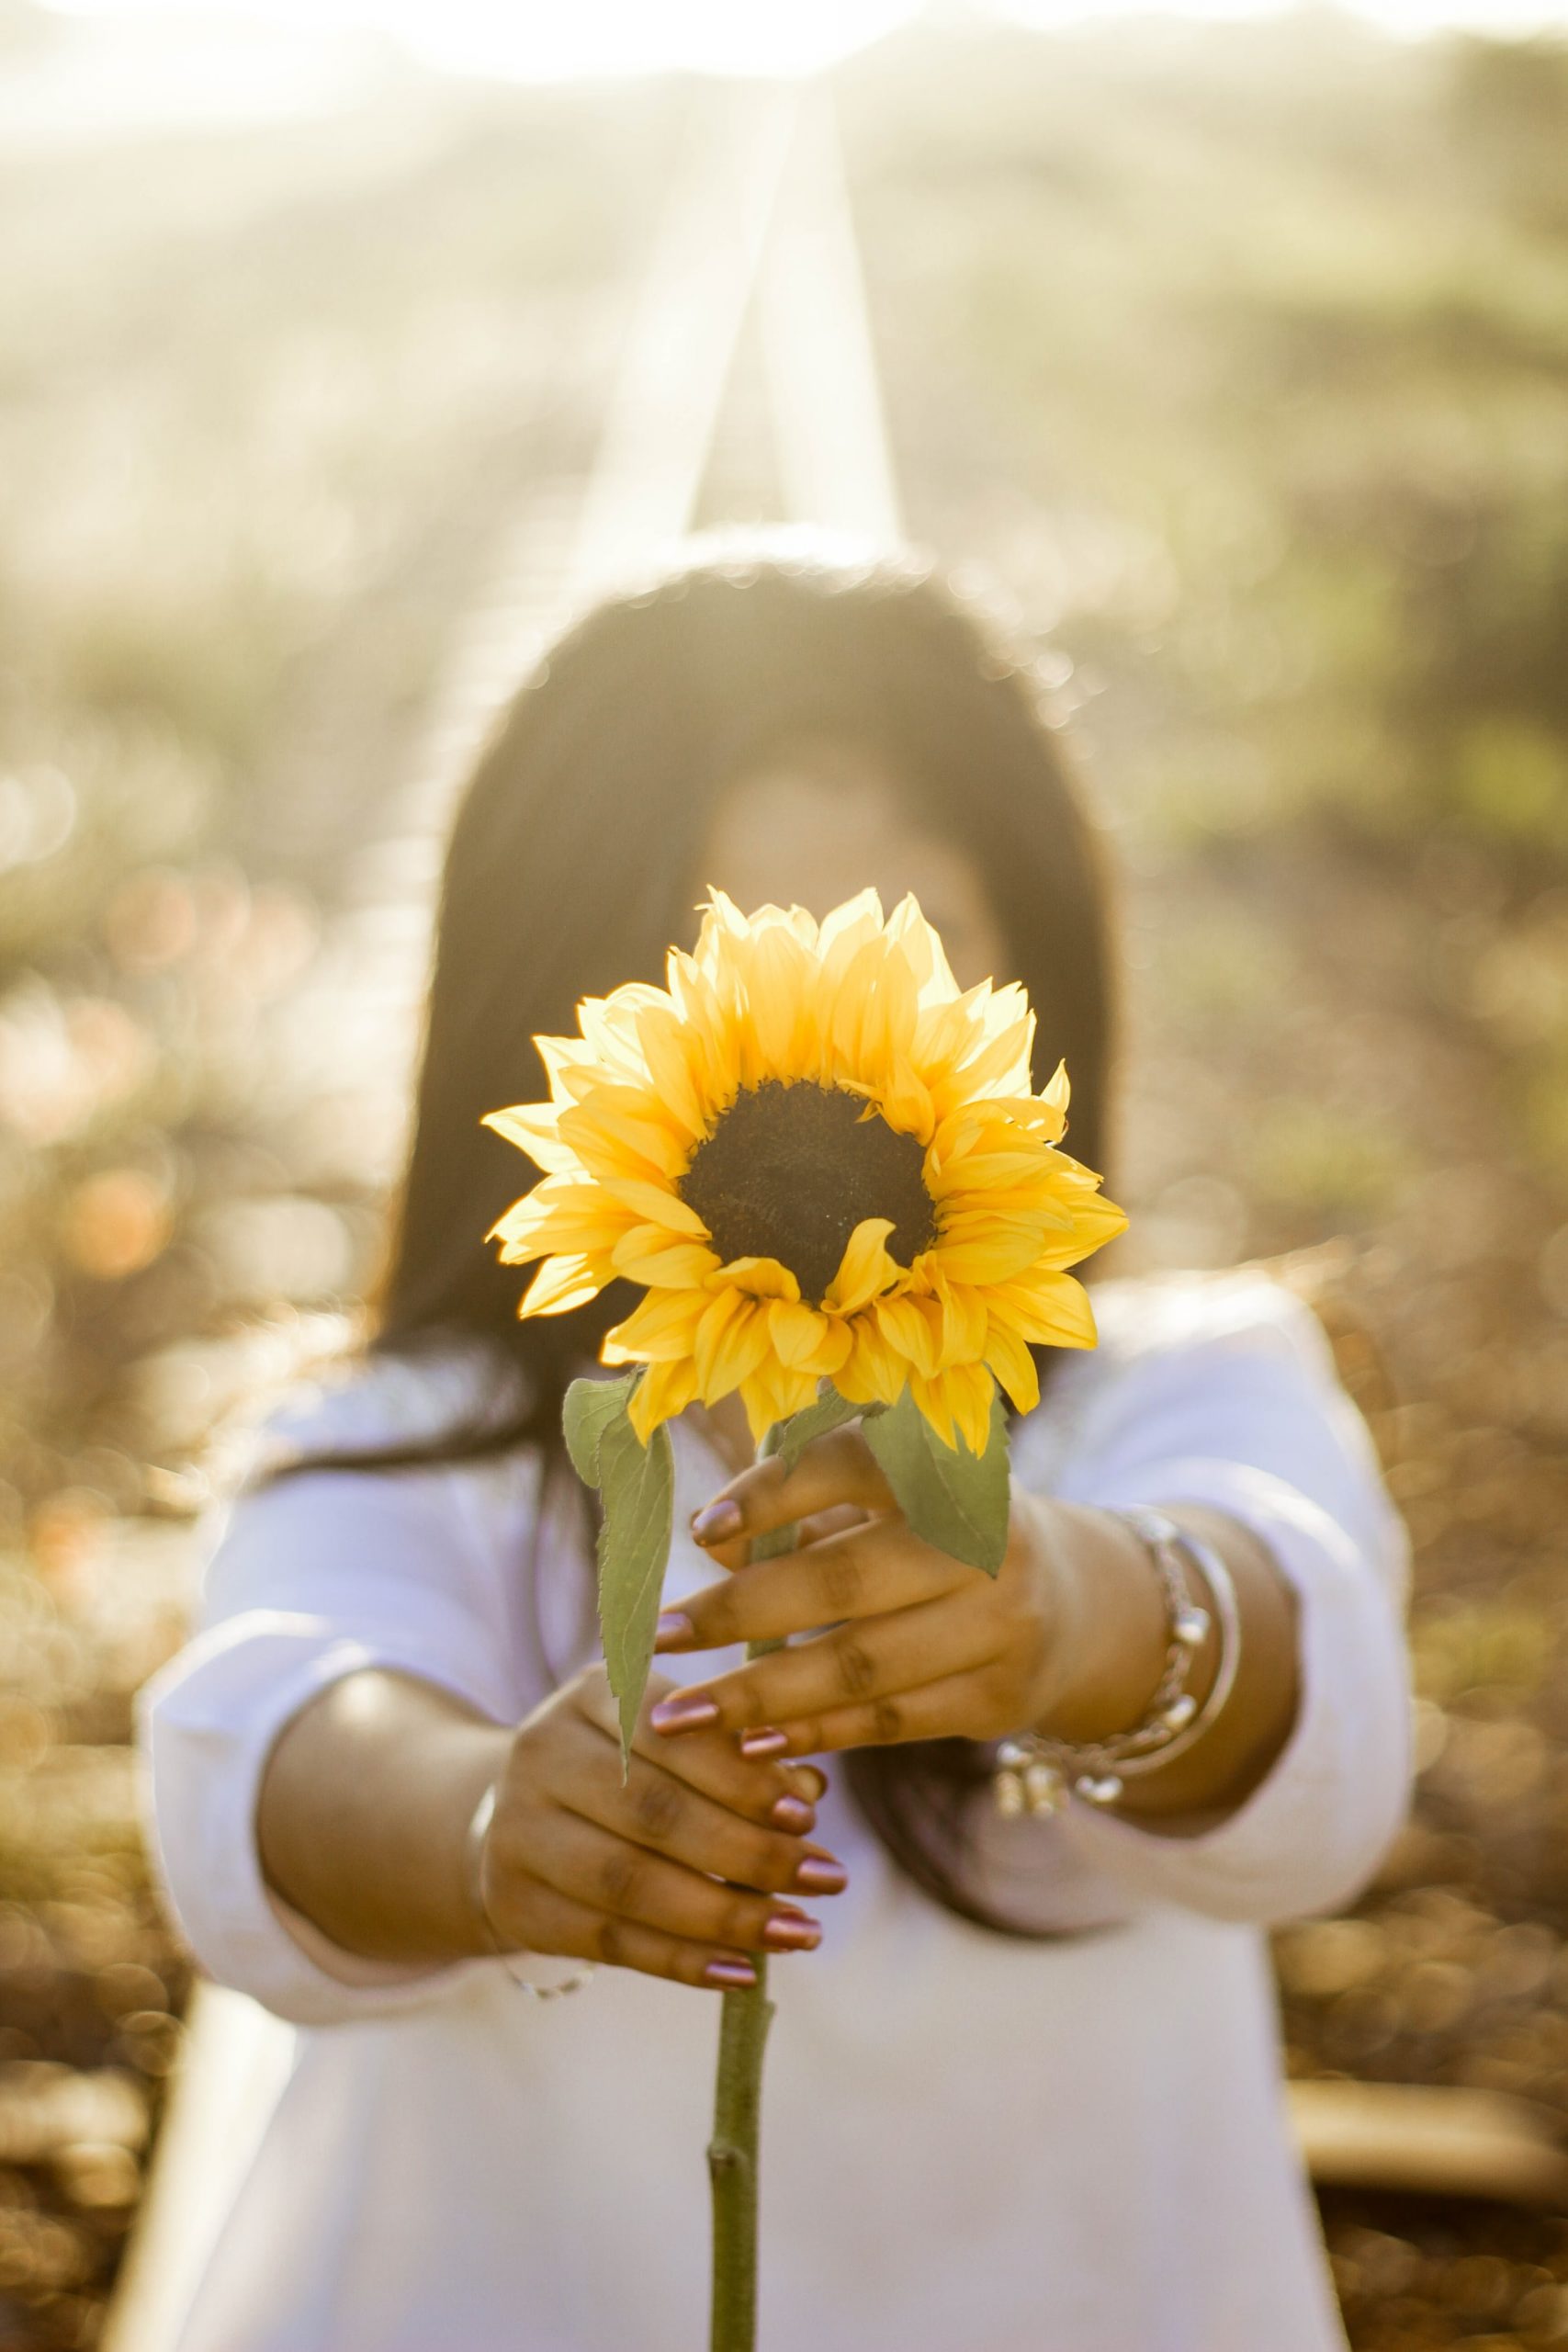 Image of Black woman standing a field while holding a sunflower. This image represents the calm and light desired by Black folks seeking therapy. Meet with an EMDR therapist in Baltimore, MD today. | 21204 | 21286 | 21044